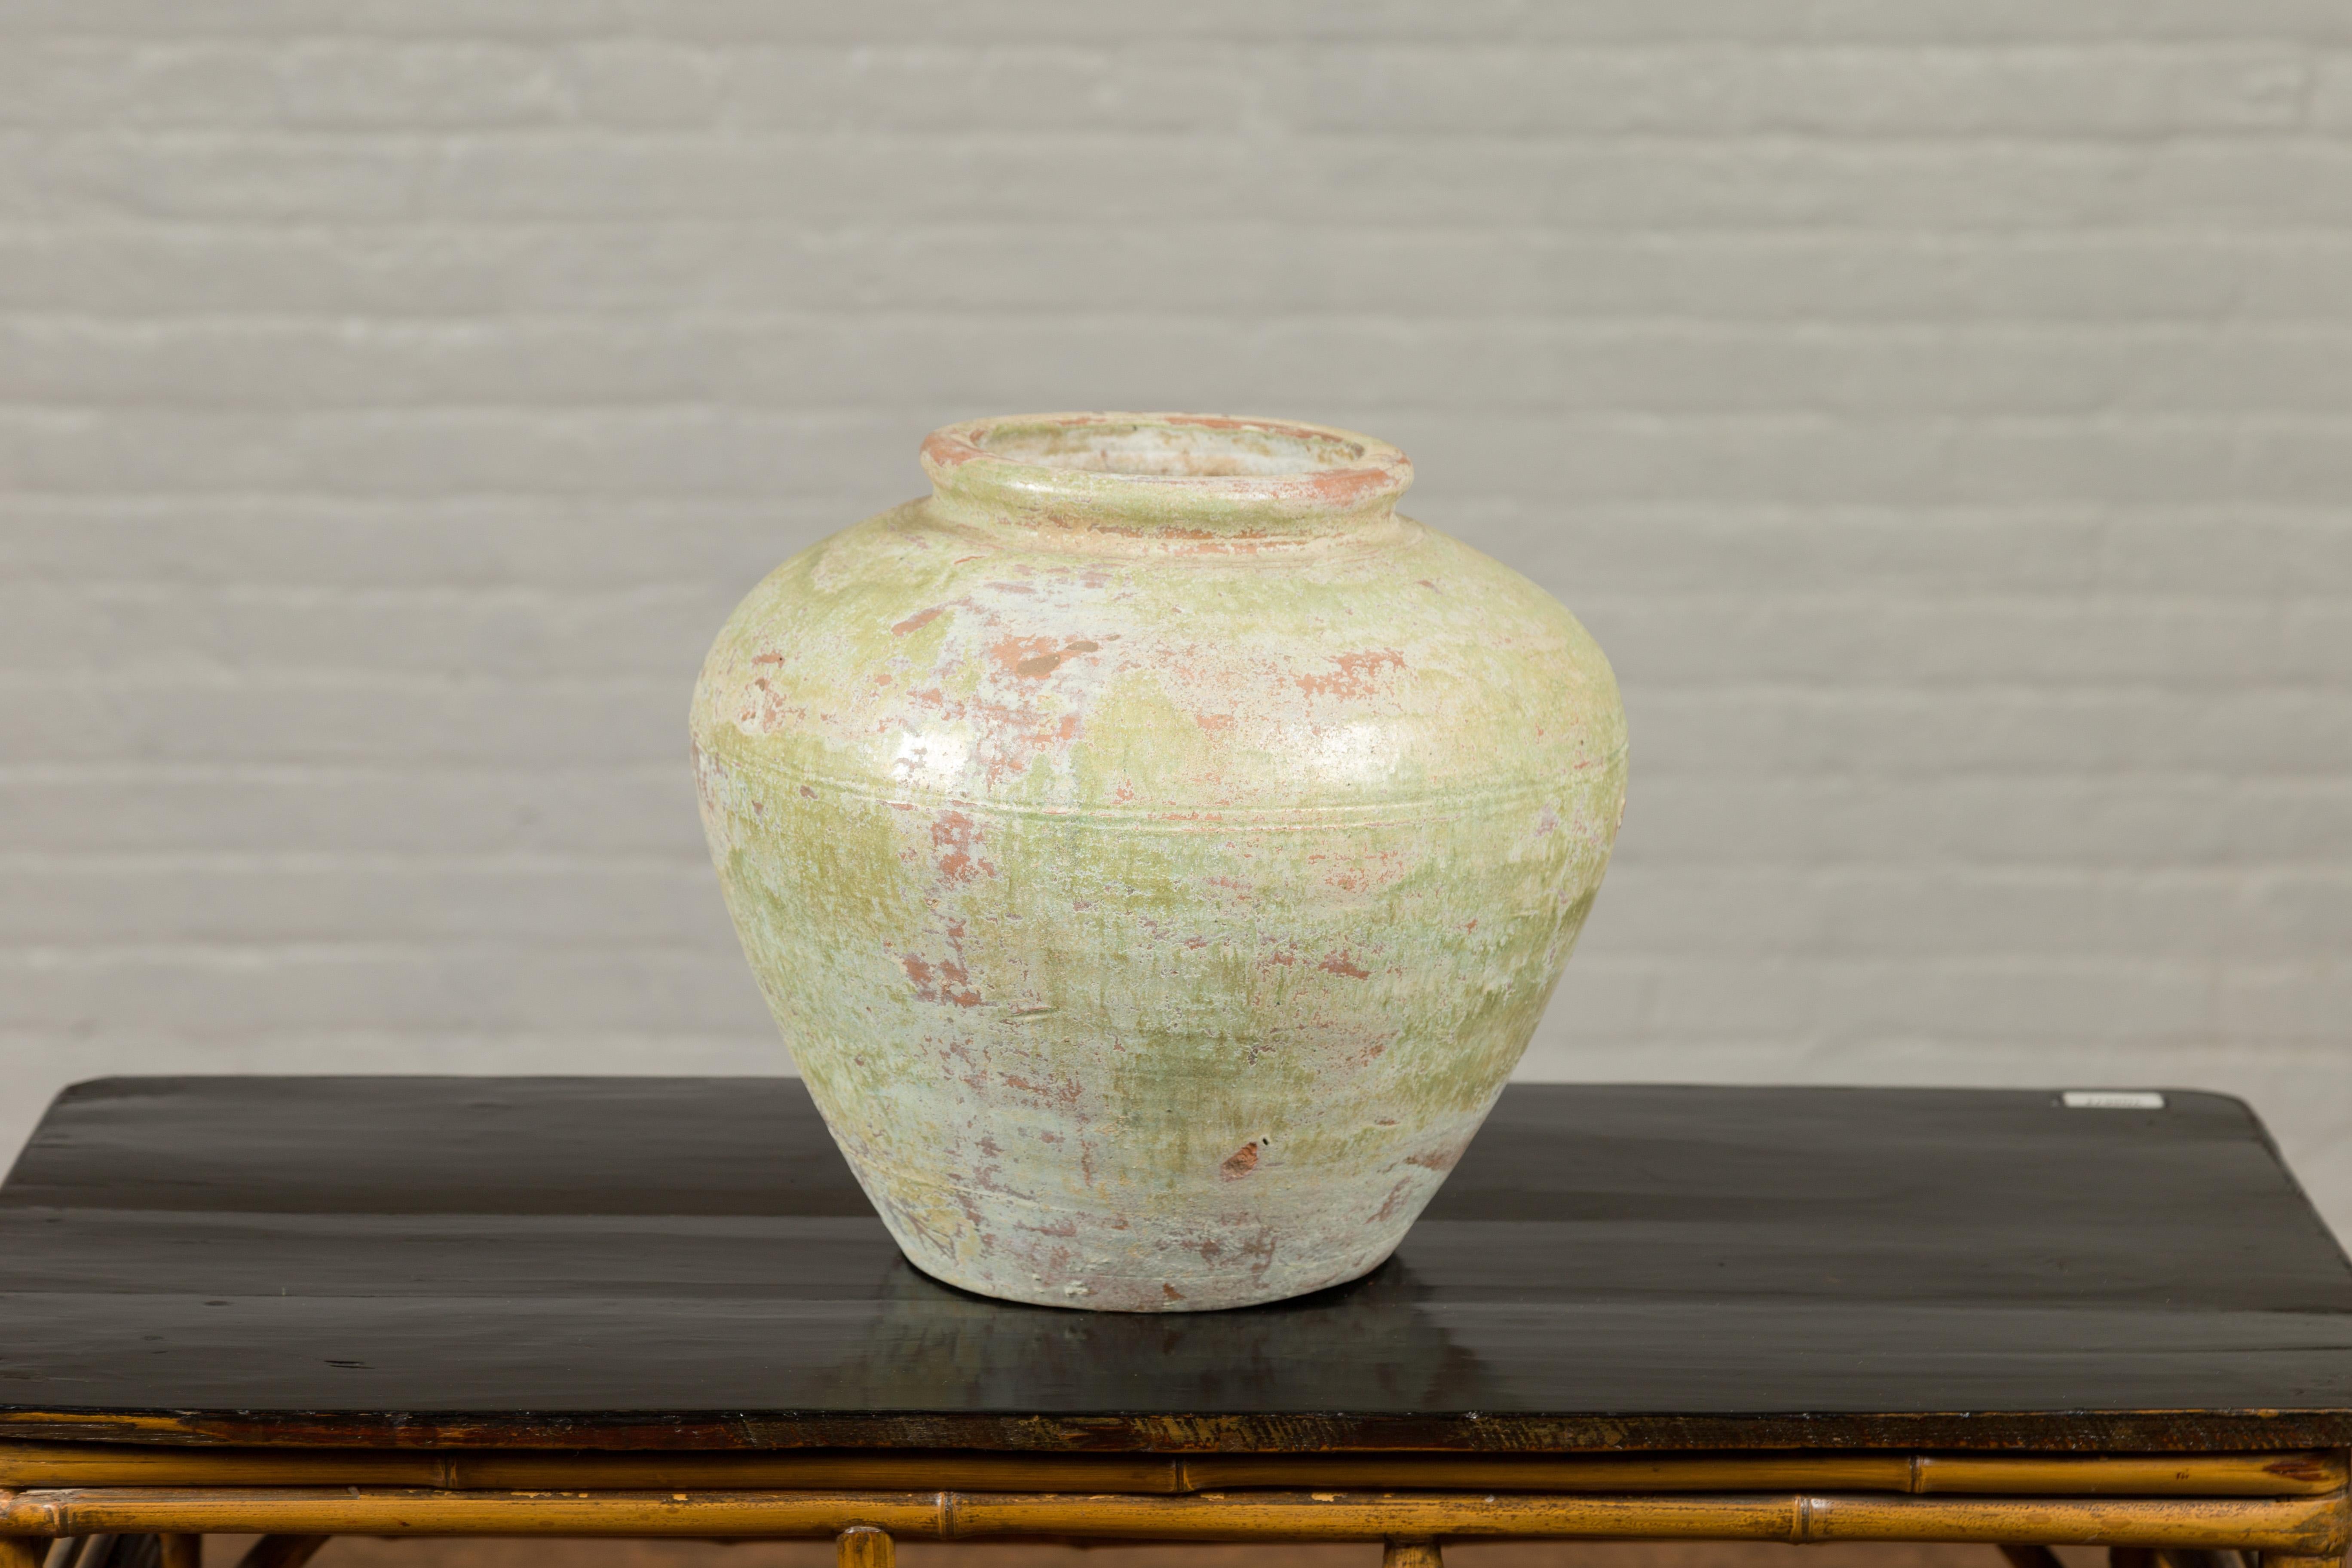 Ceramic Chinese Qing Dynasty Period Exterior Vase with Distressed Yellow Green Glaze